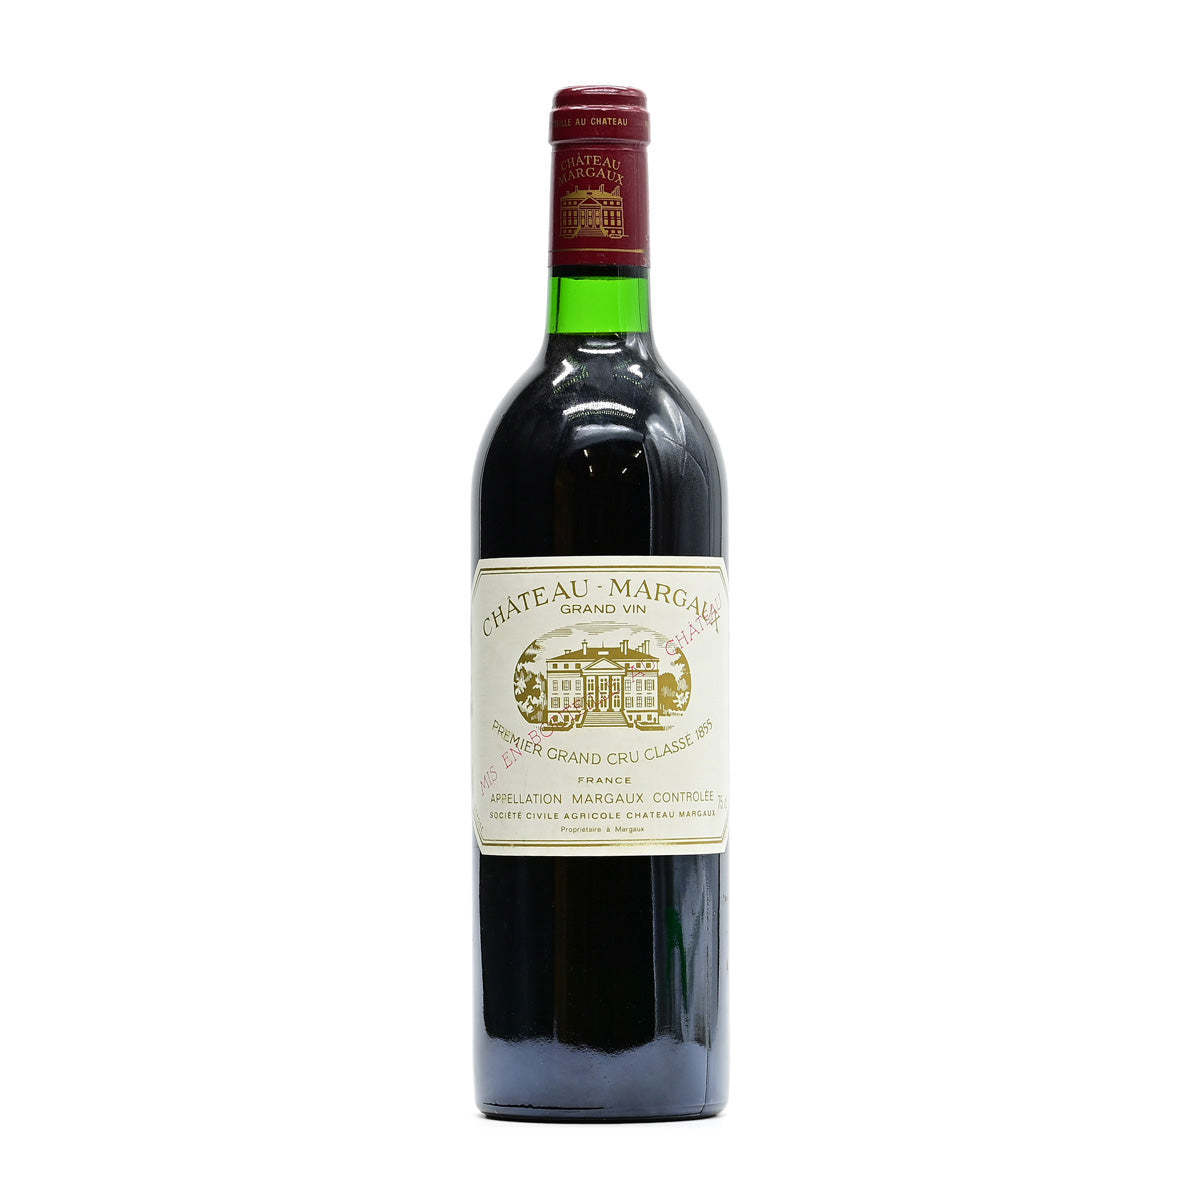 Chateau Margaux 2020, 750ml French red wine; composed of Cabernet Sauvignon, Merlot, Cabernet Franc, Petit Verdot; from Margaux, Bordeaux, France – GDV Fine Wines, Hong Kong